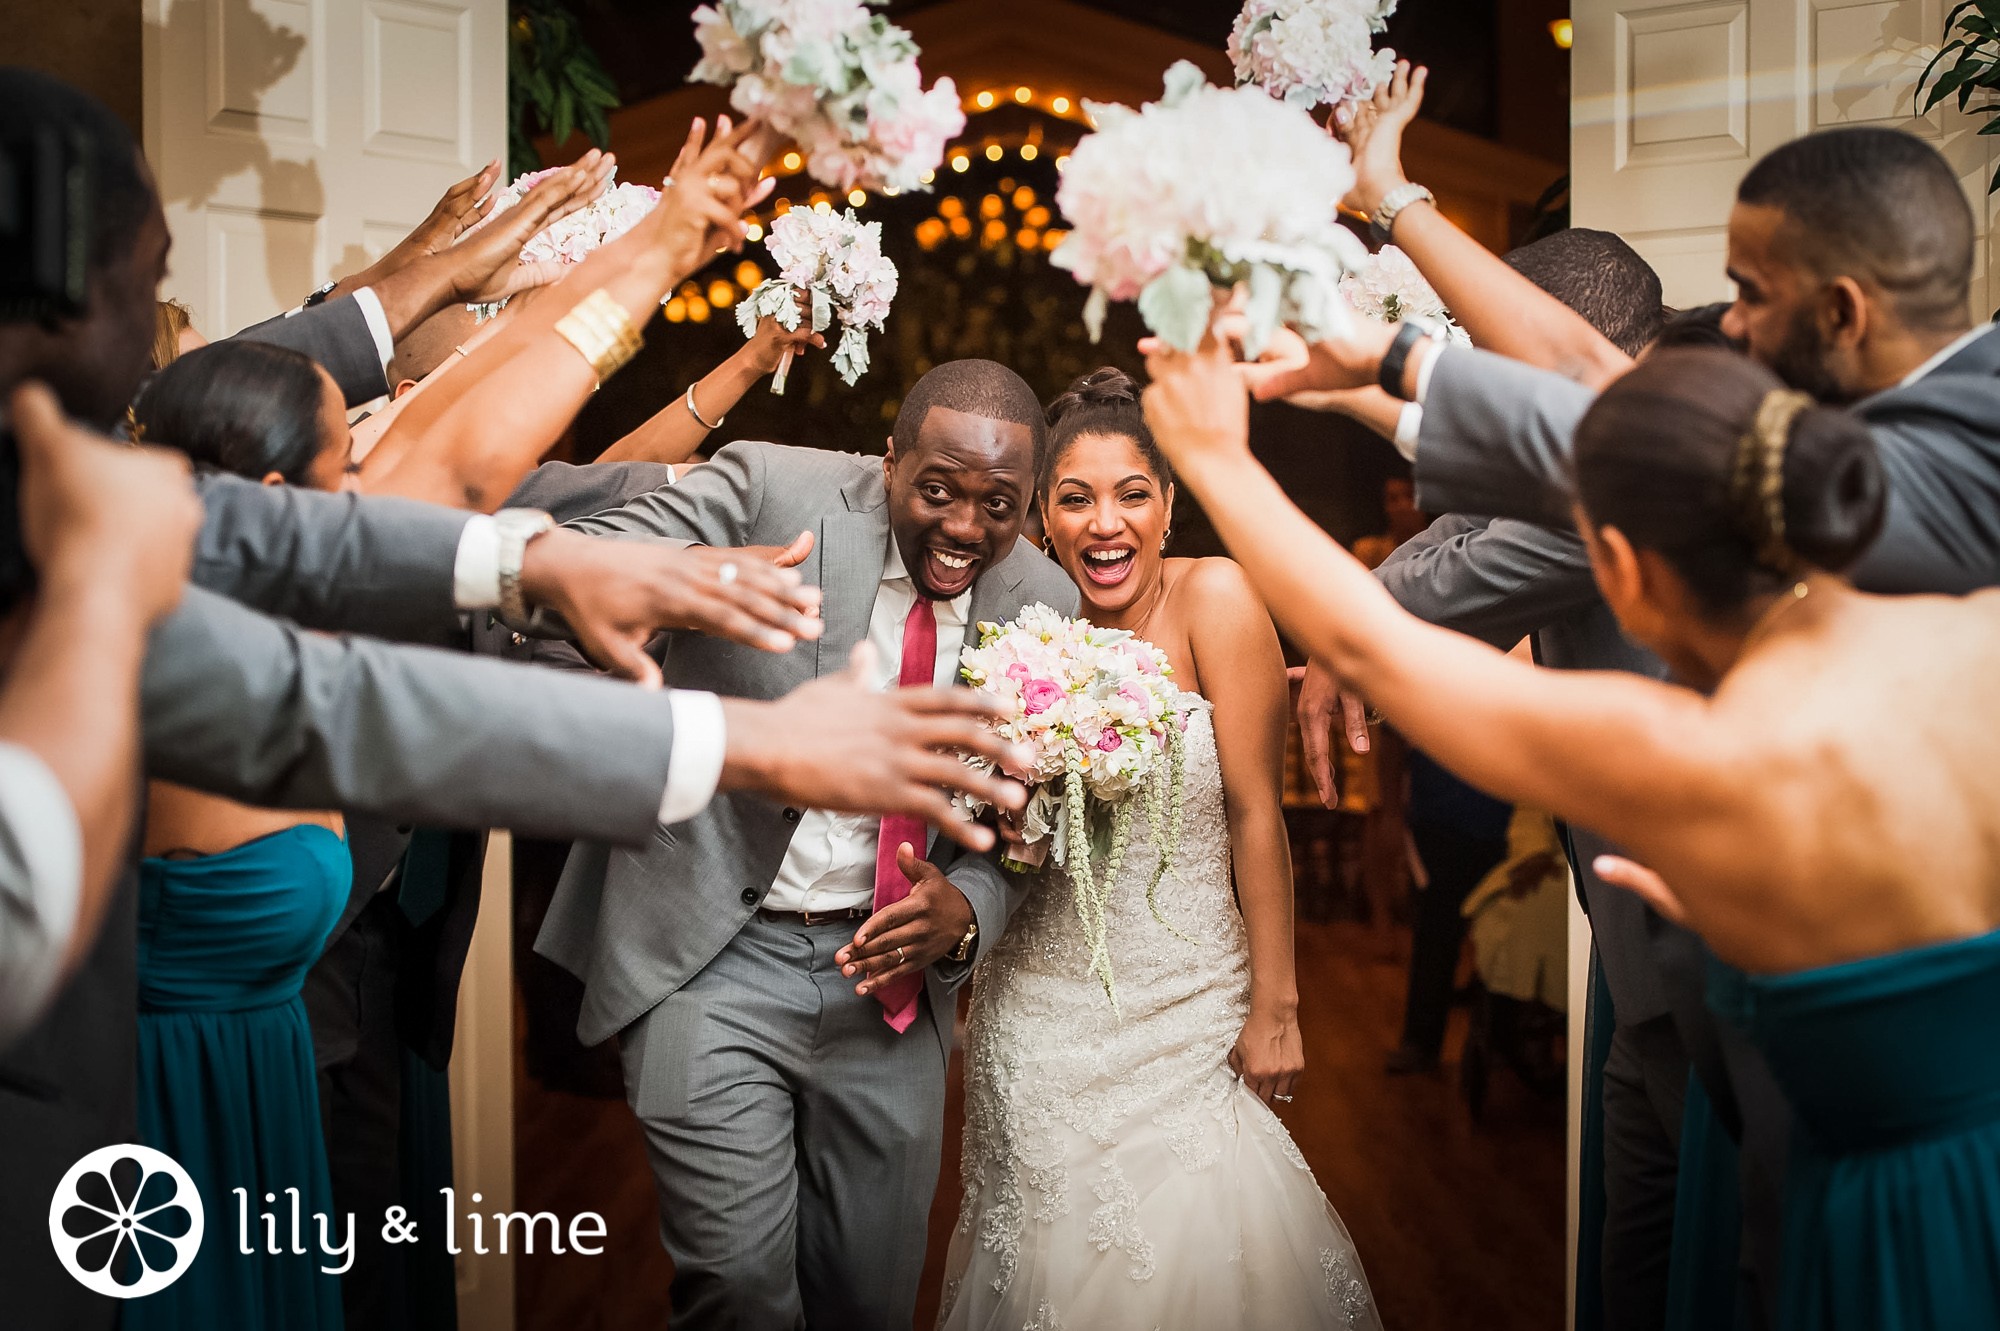 5 Wedding Moments You'll Want Captured on Video